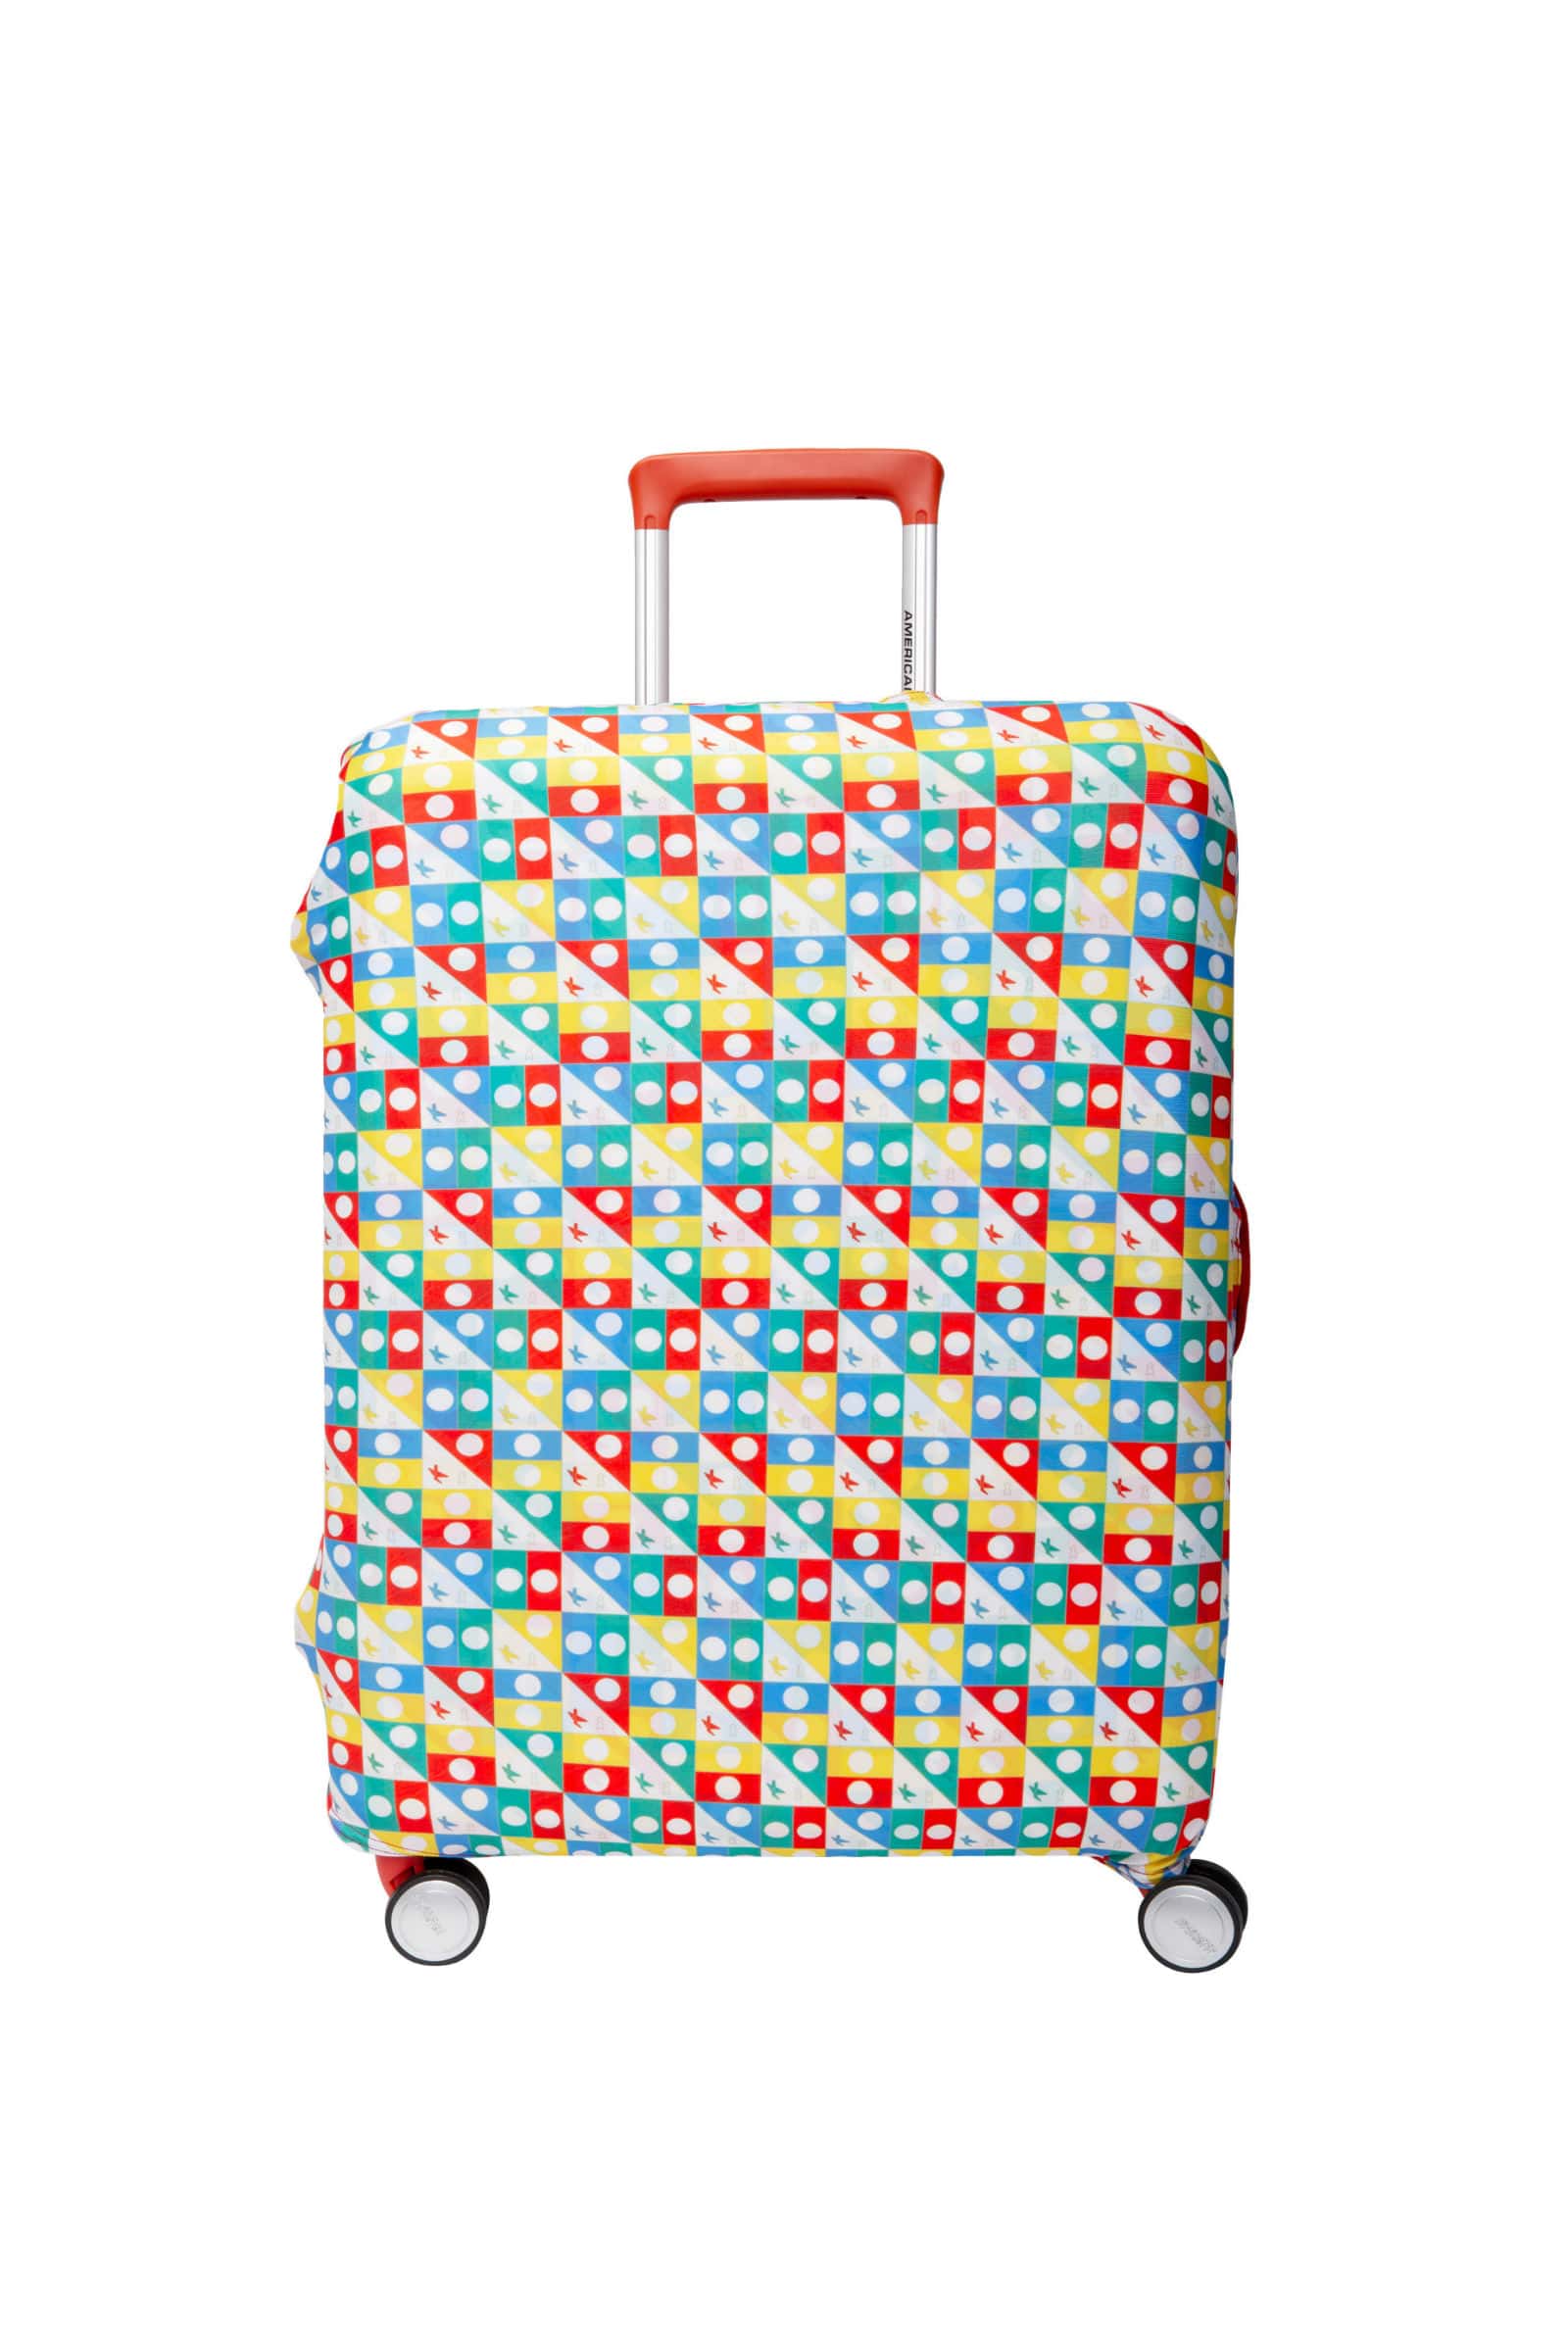 I COME FROM HK STRETCHABLE LUG.COVER M  size | American Tourister